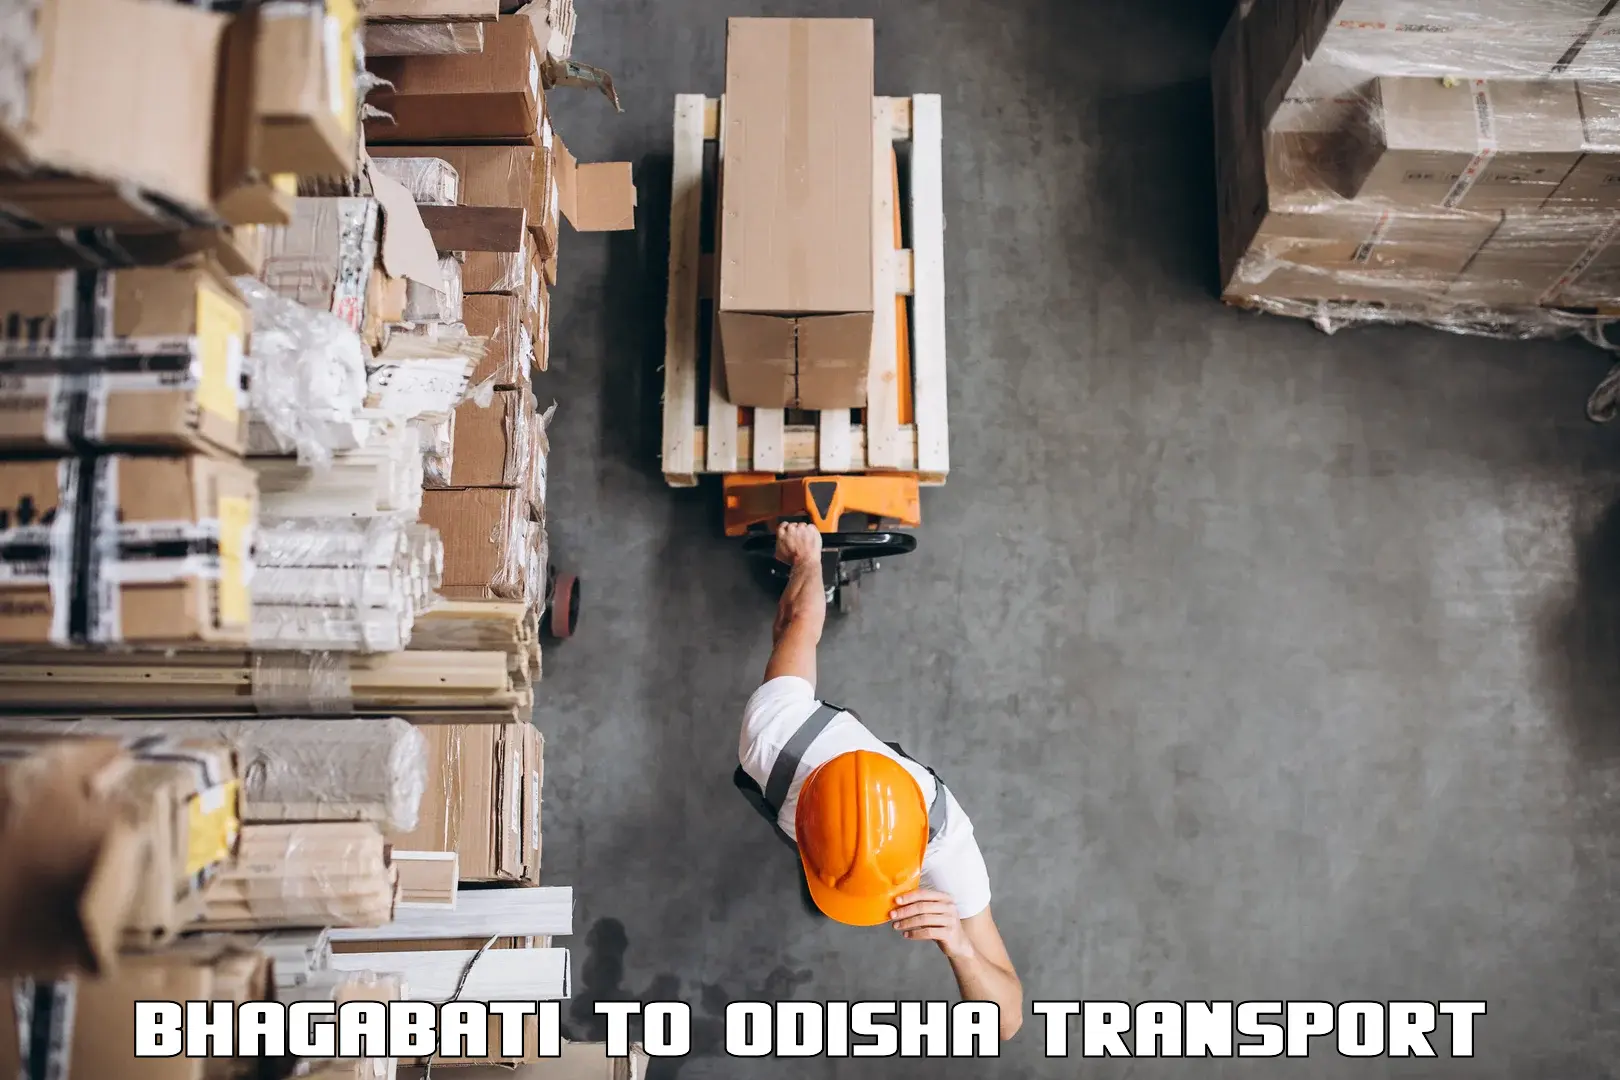 Luggage transport services in Bhagabati to Cuttack